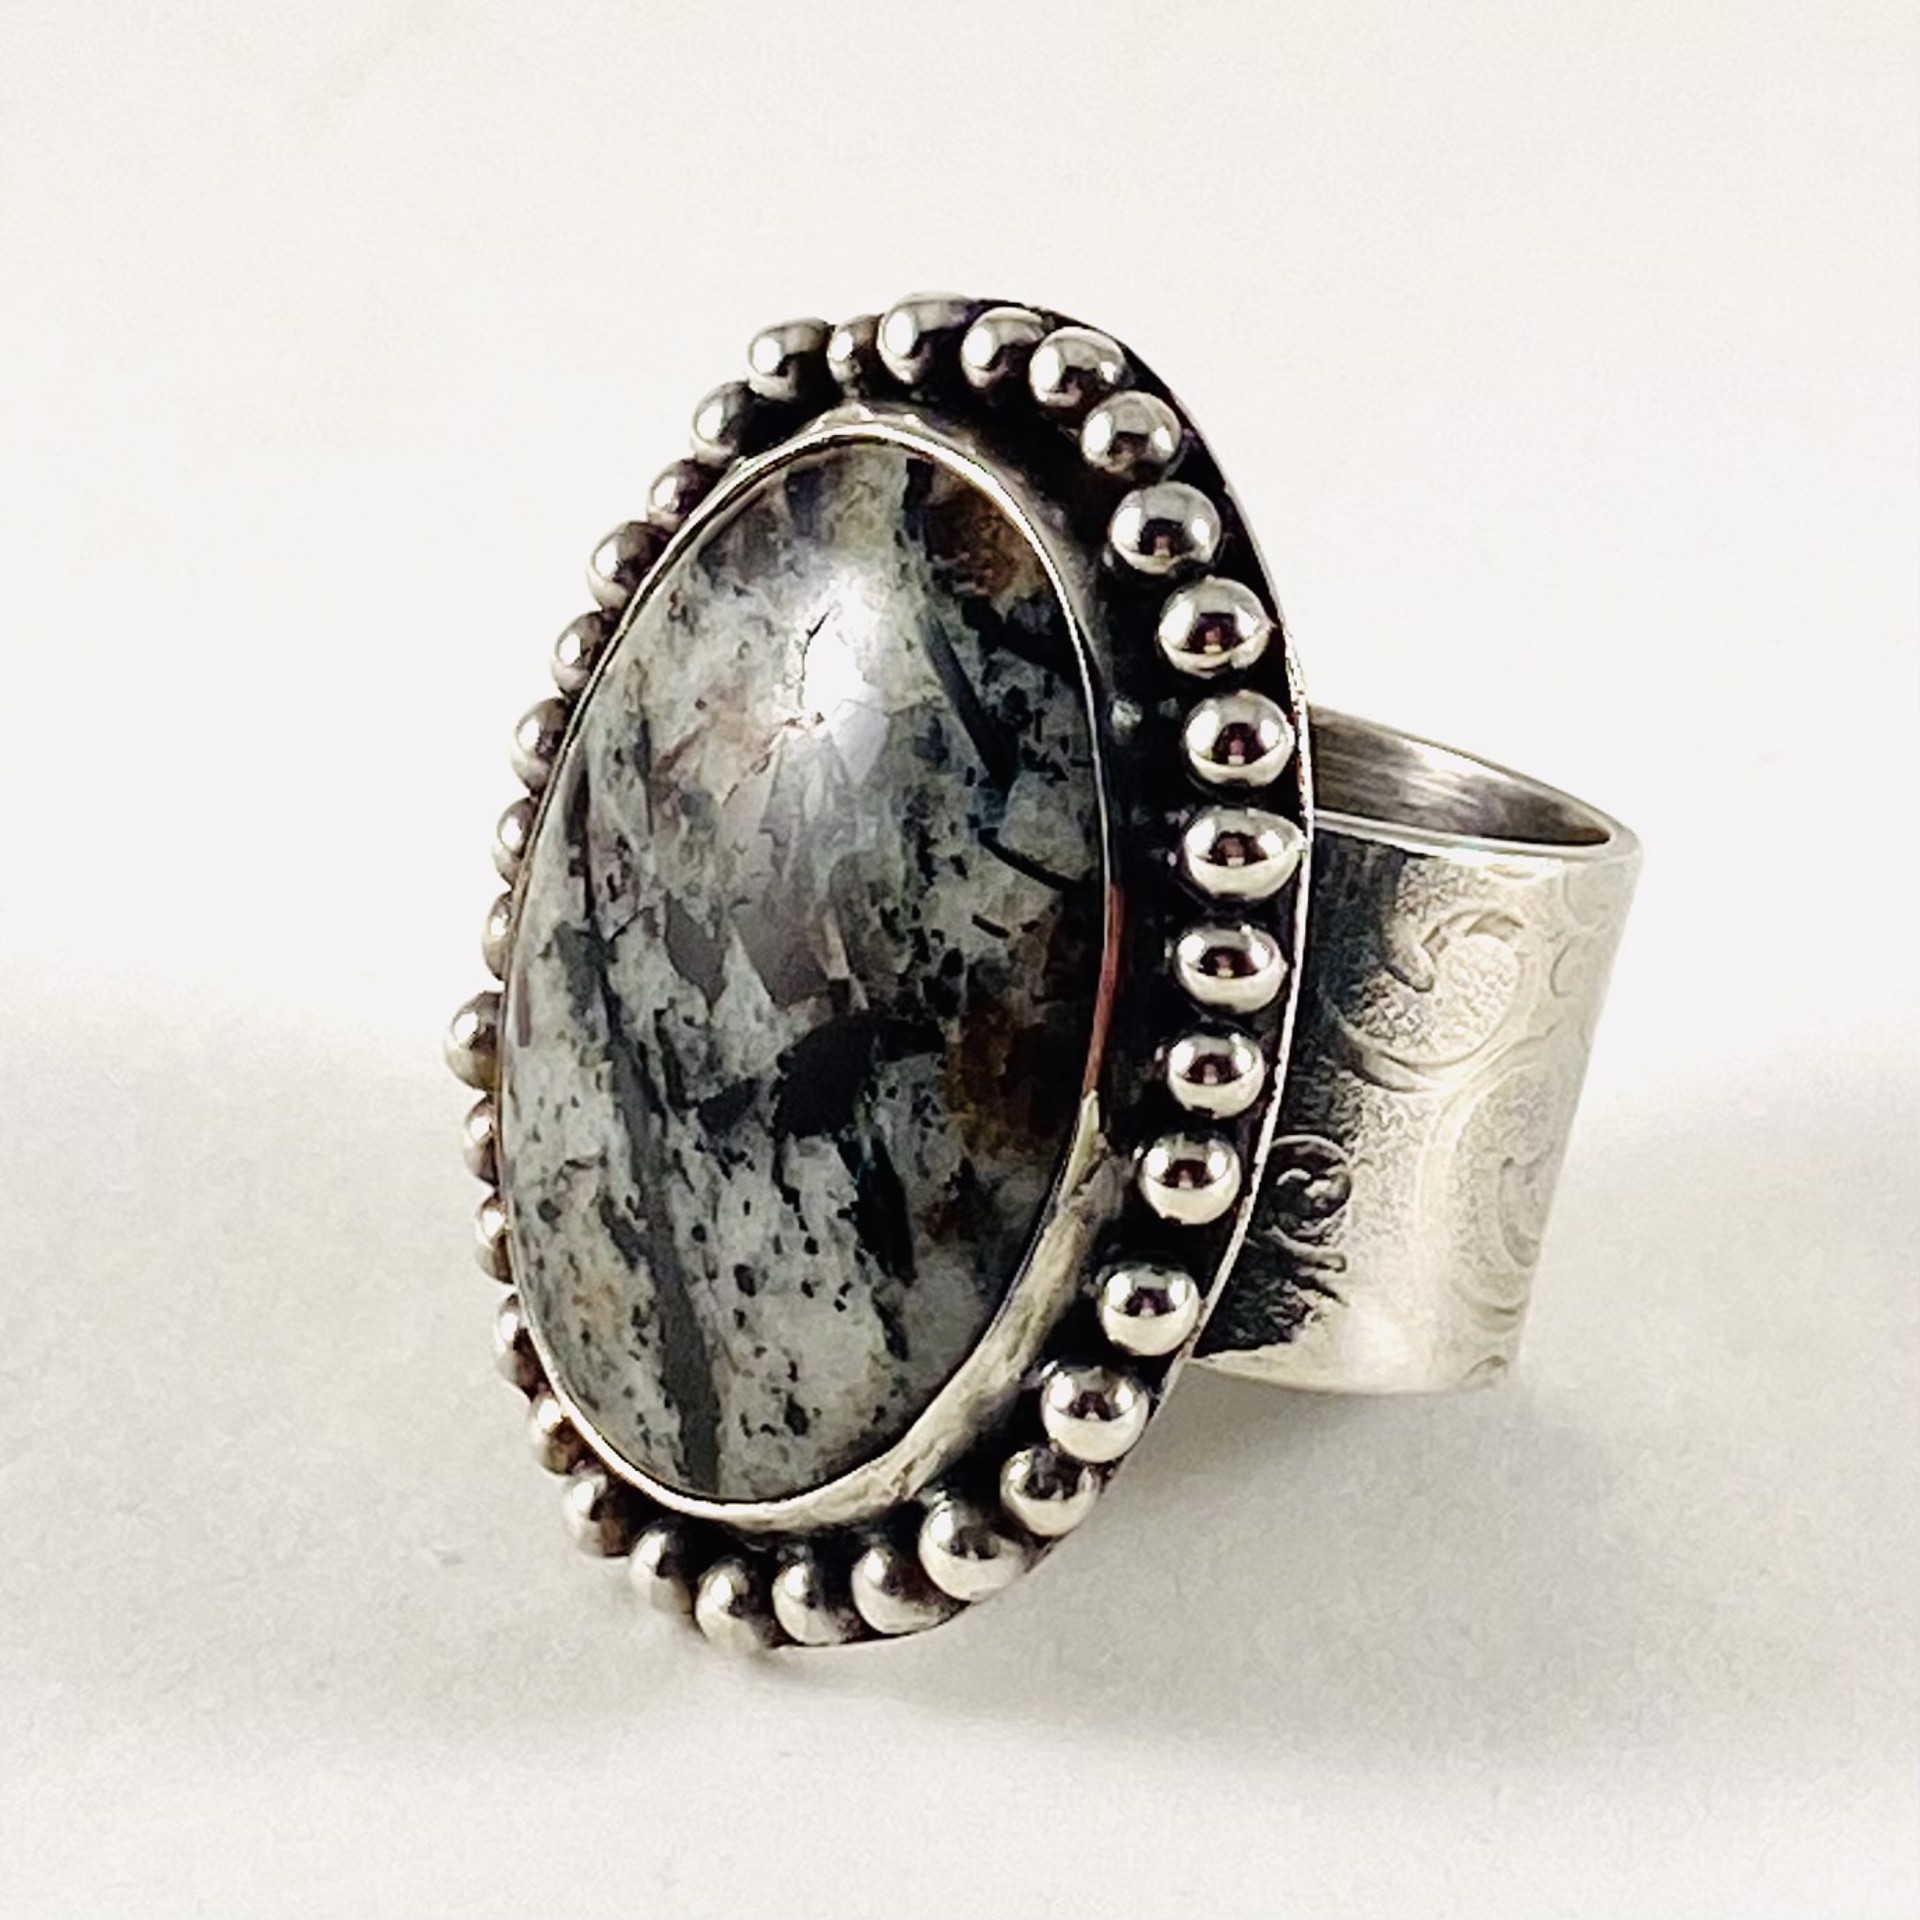 AB17 Russian Astro-phyllite Ring sz 7.5 by Anne Bivens